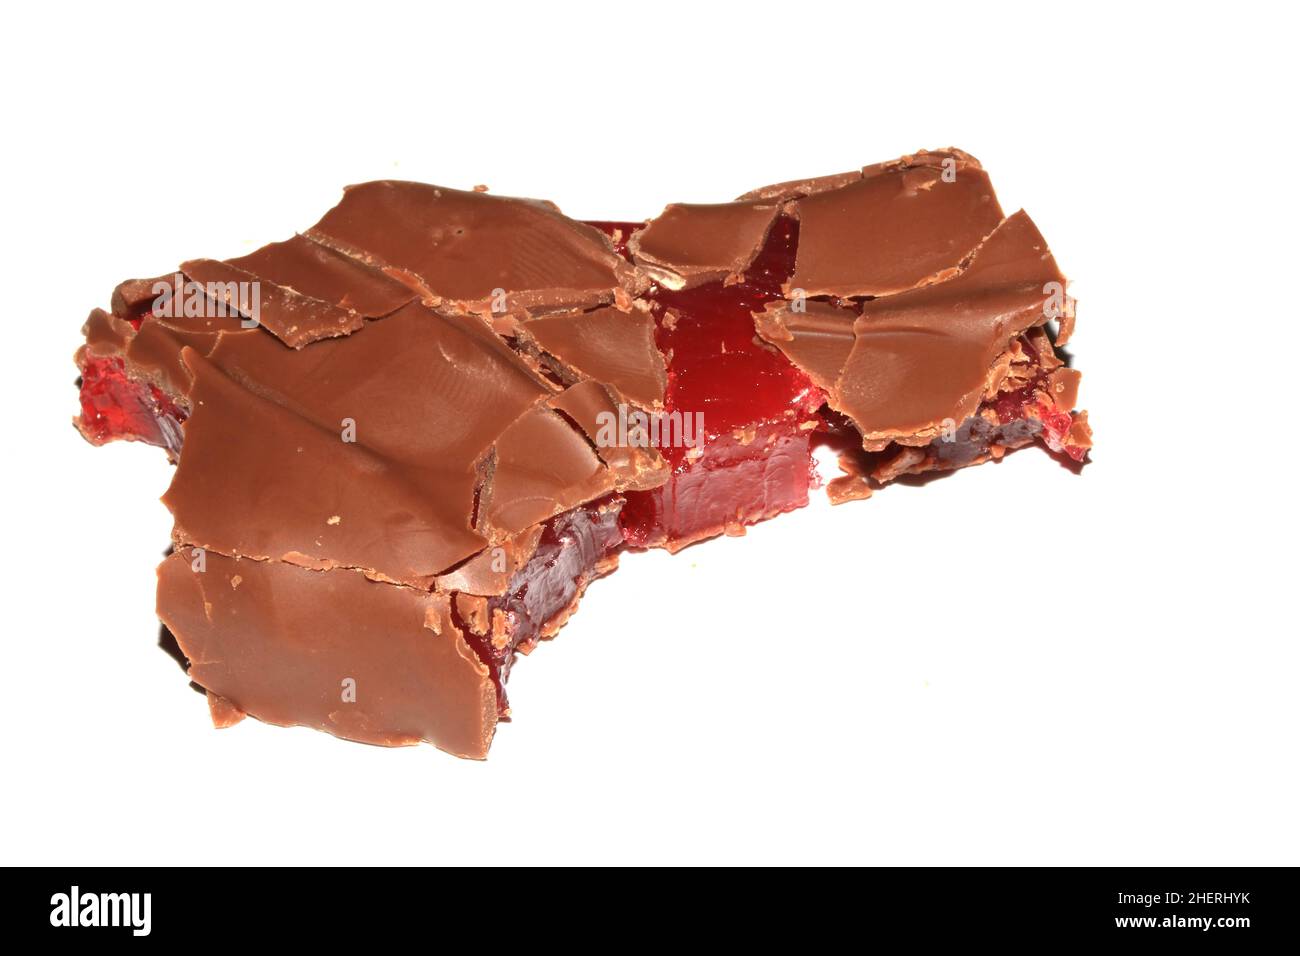 A Bitten Half Eaten Chocolate Bar with Cherry Jelly Inside on White Background Stock Photo